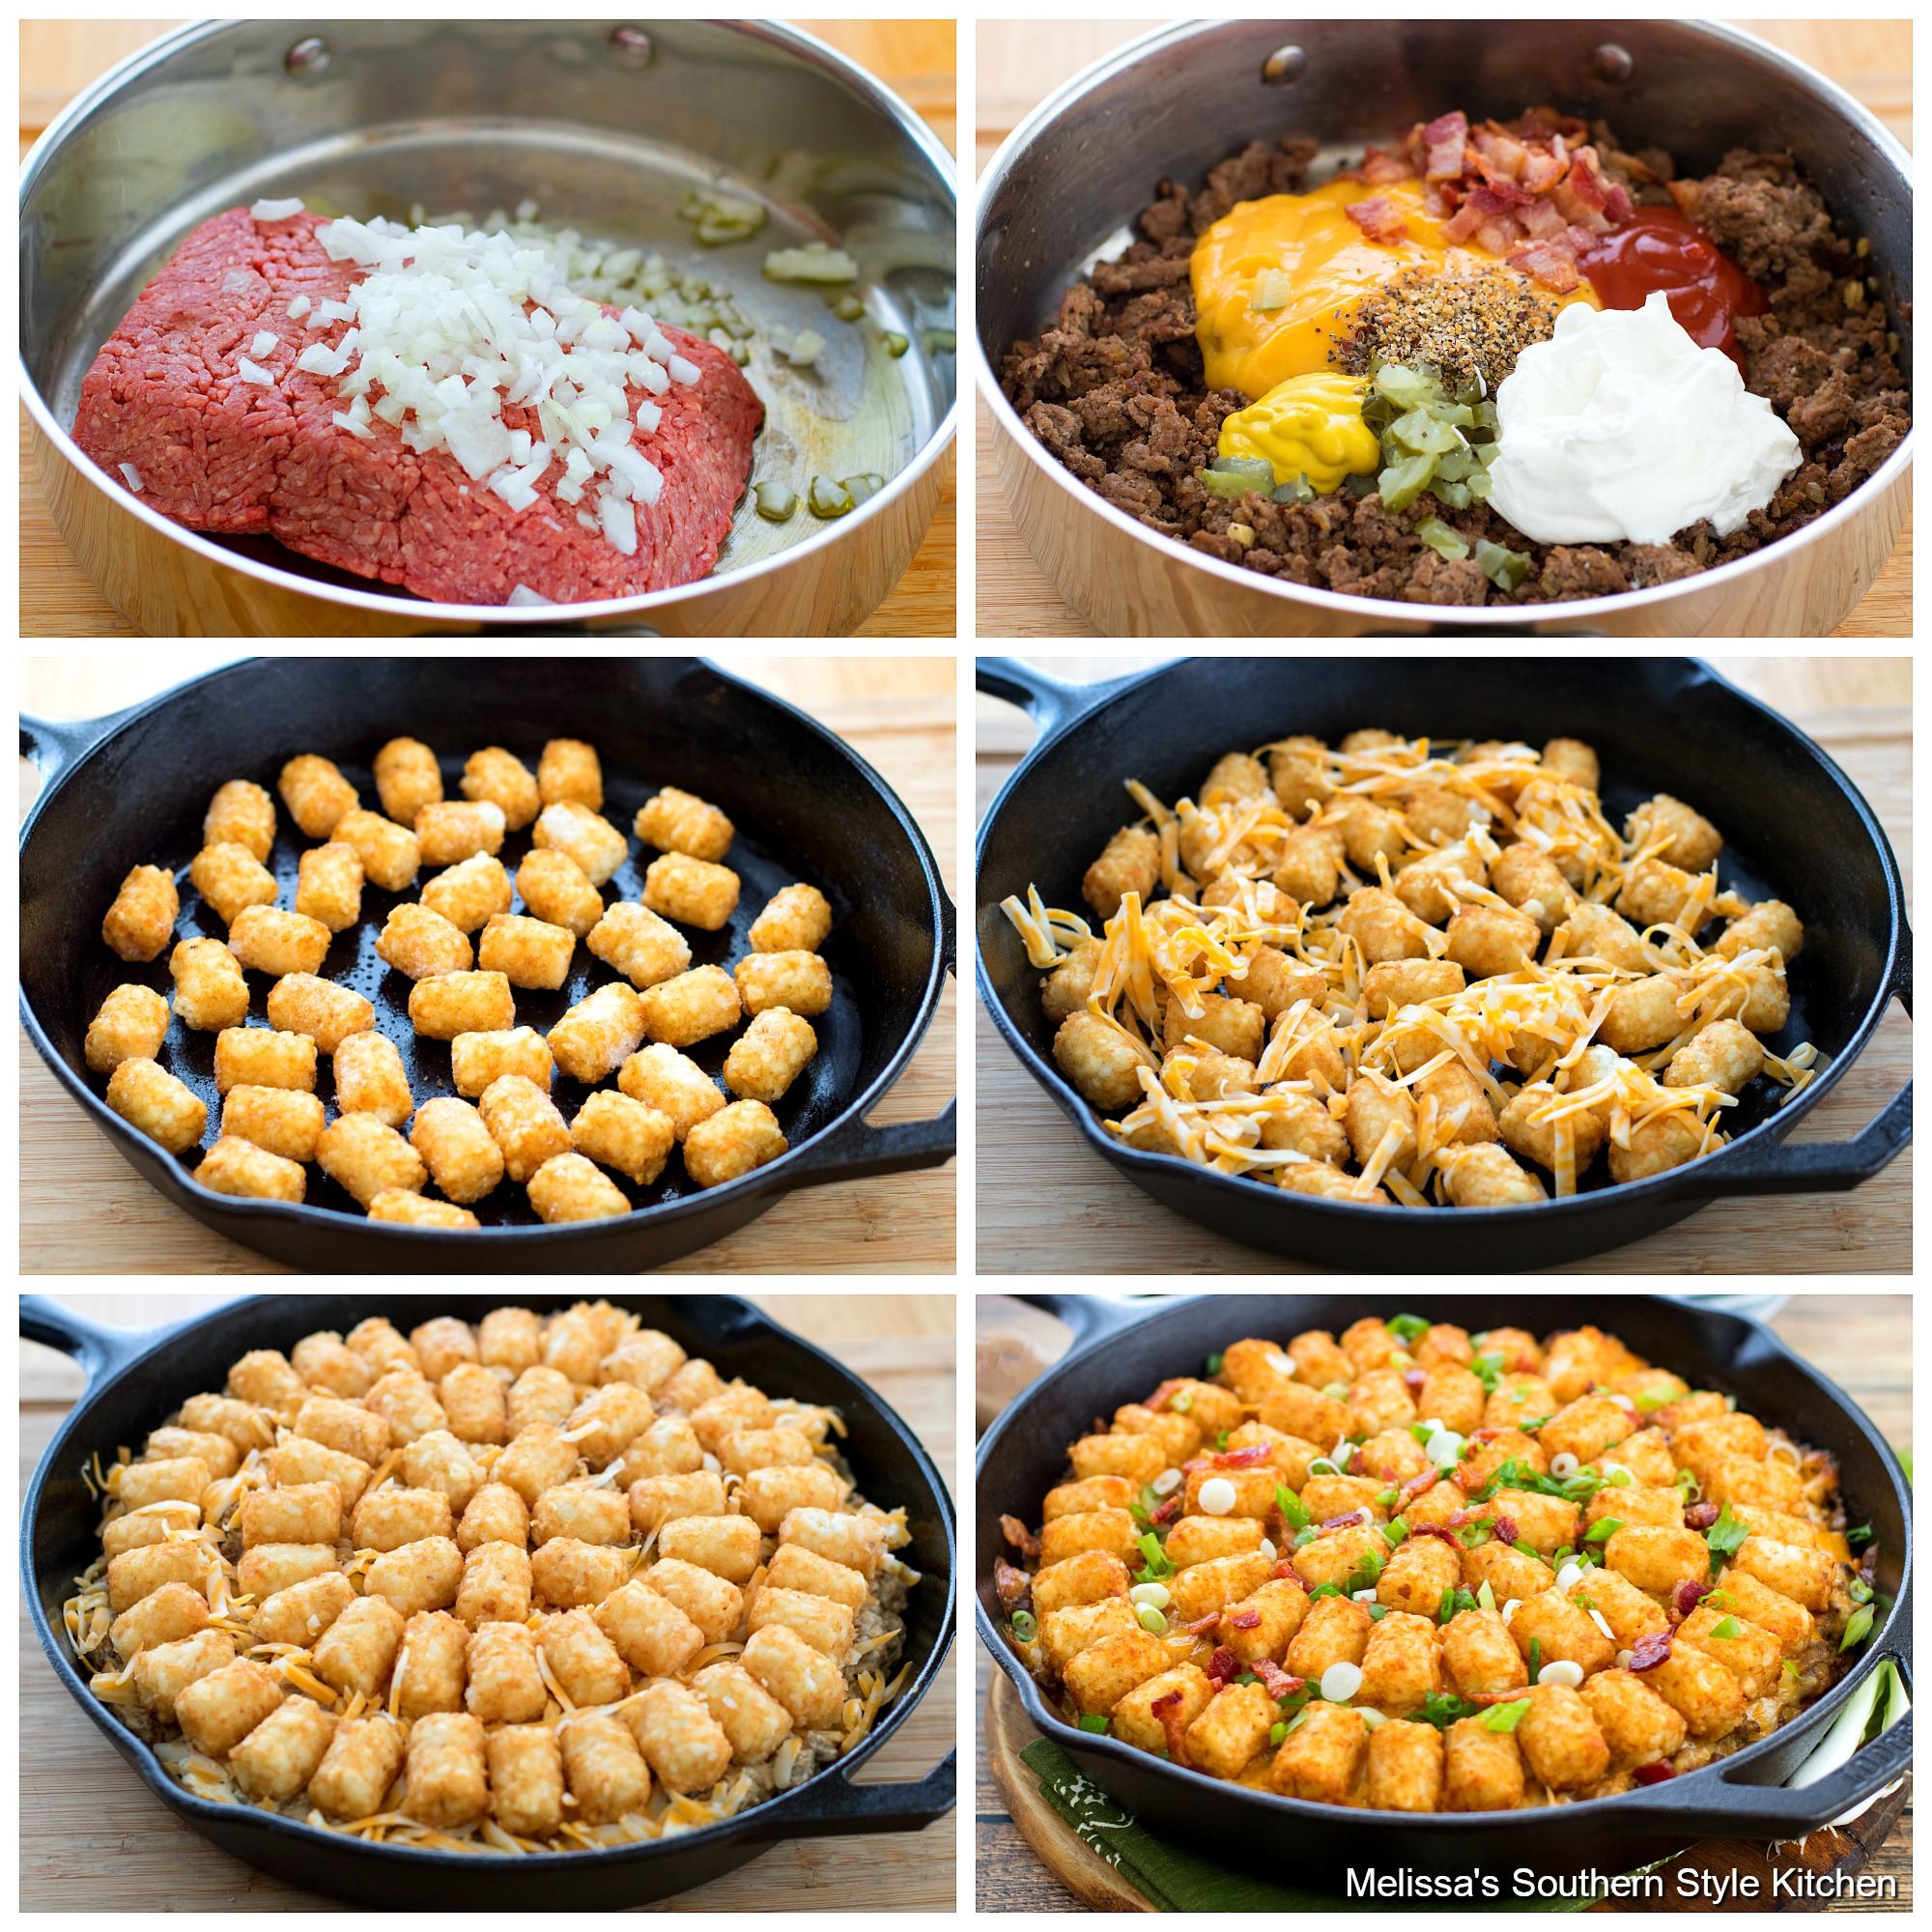 Step-by-step preparation images and ingredients for cheeseburger casserole